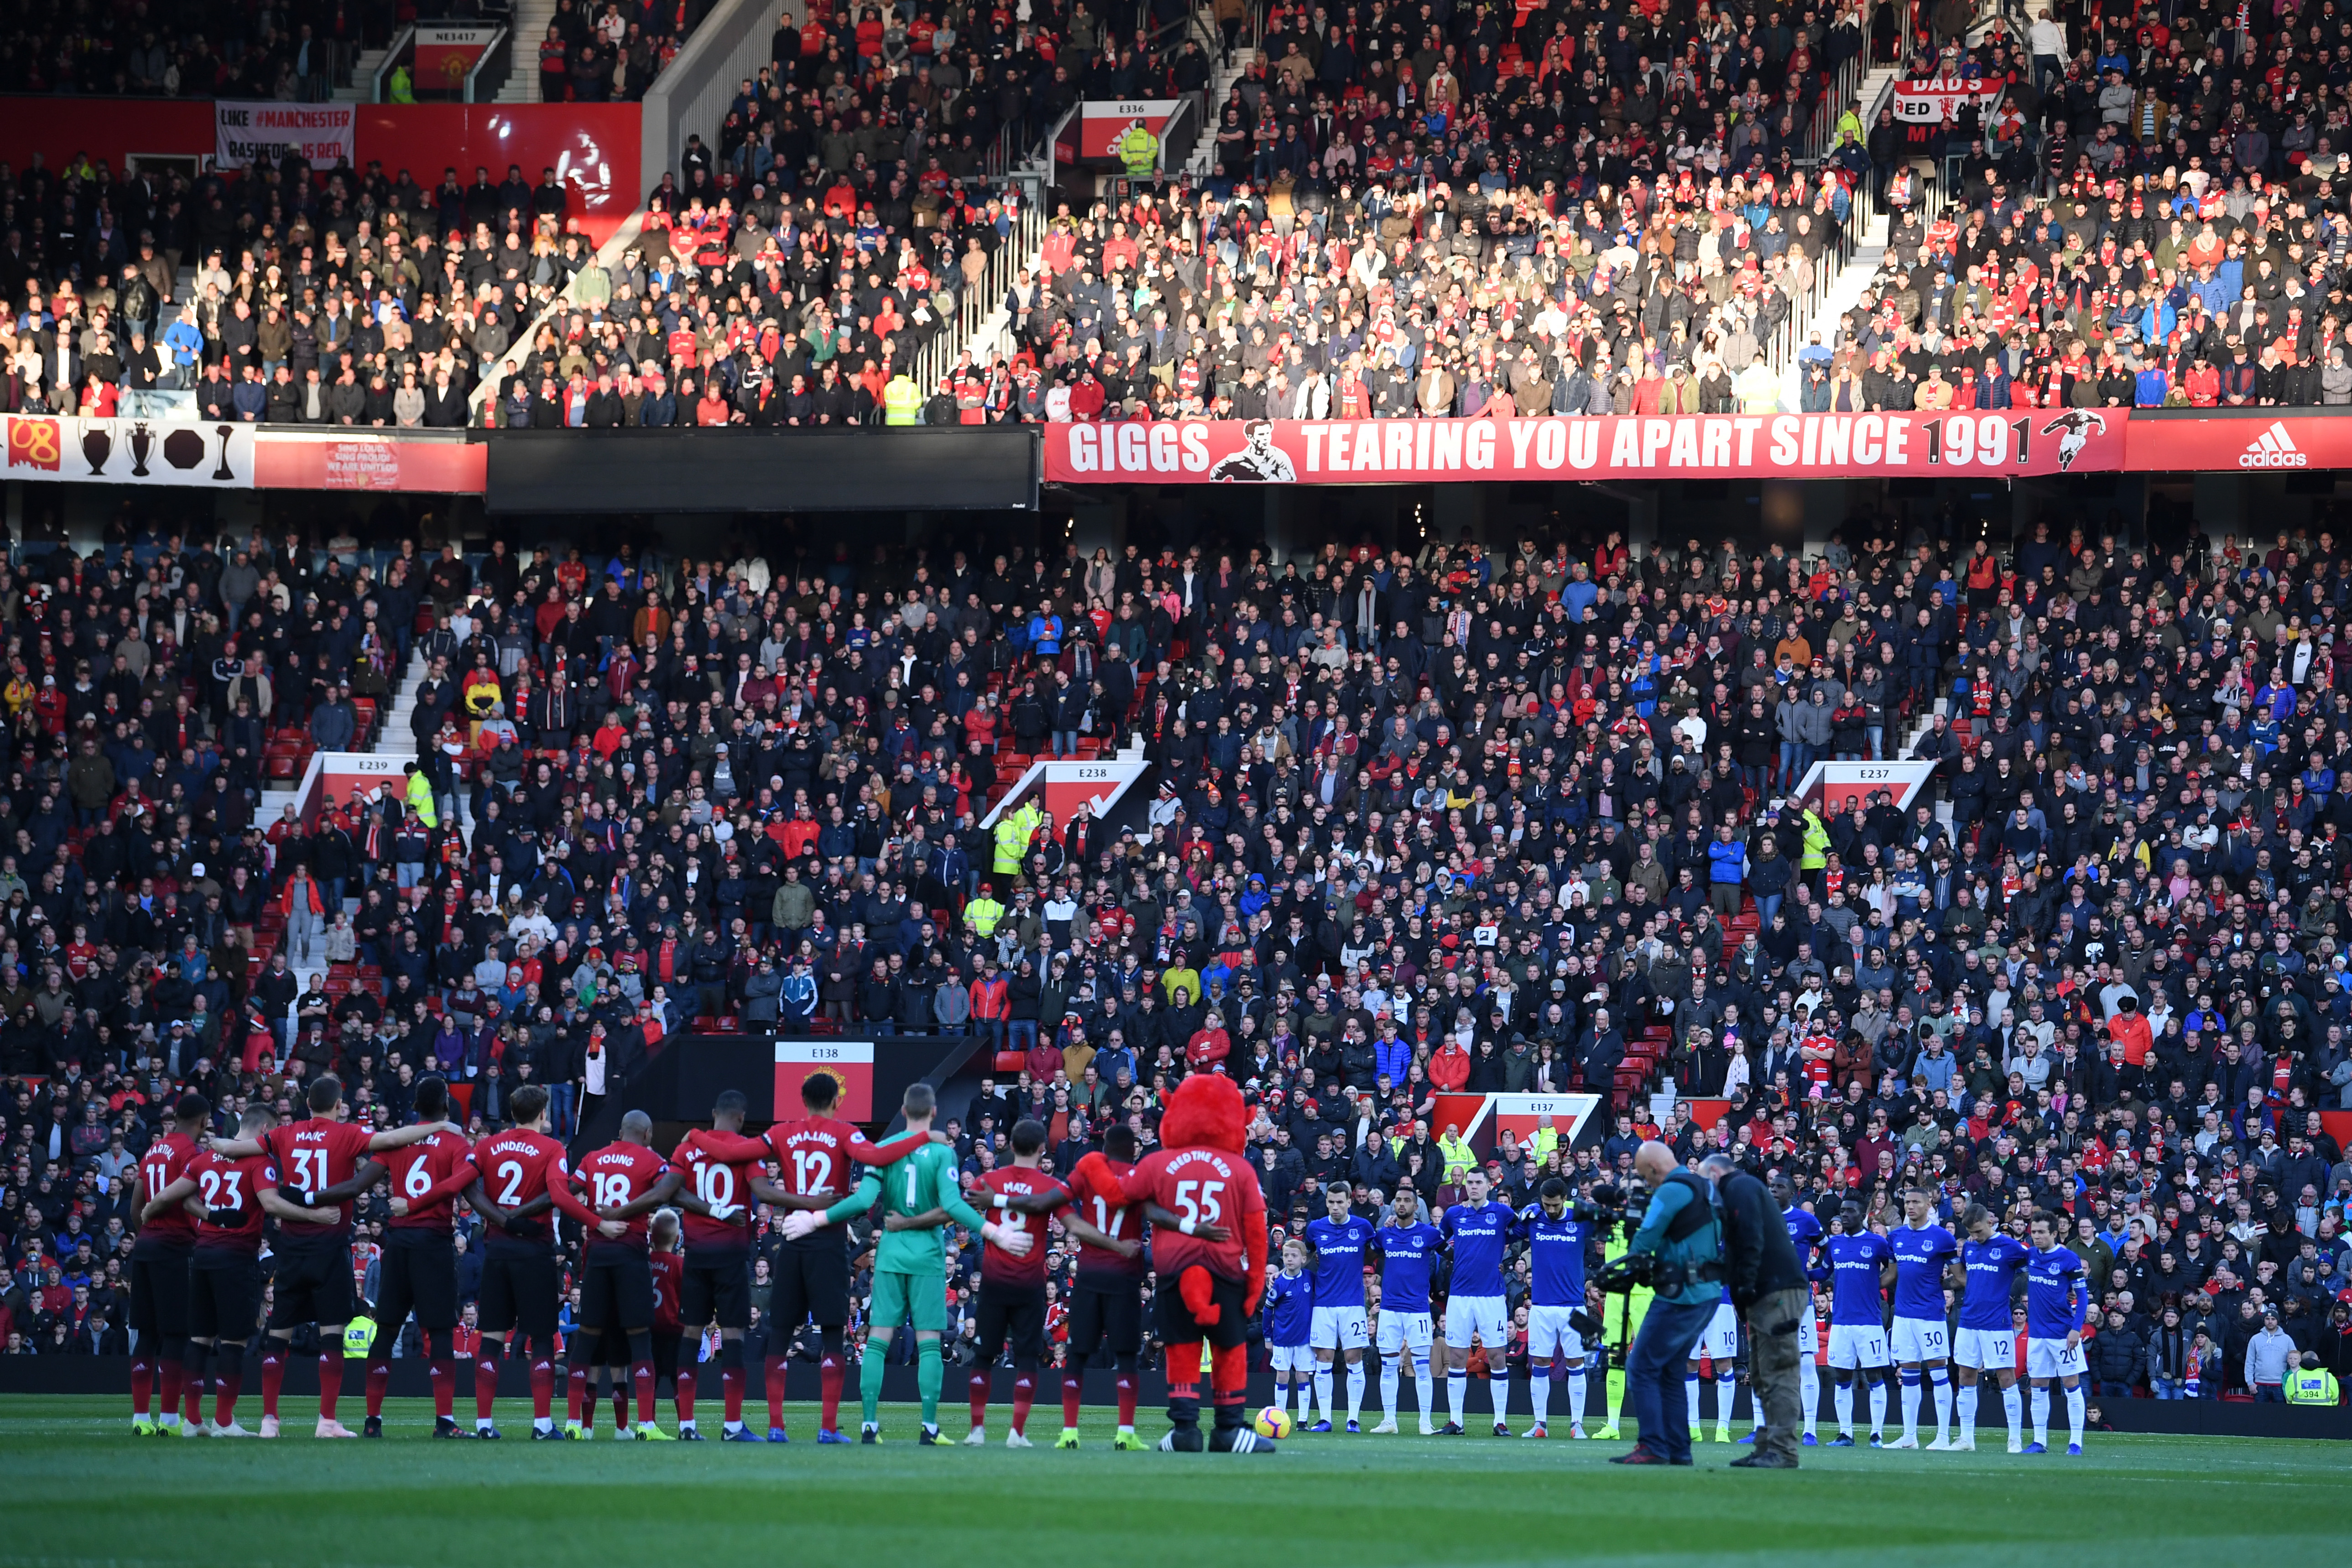 MANCHESTER, ENGLAND - OCTOBER 28:  Players of Manchester United and Everton take part in a minute of silence prior to the Premier League match between Manchester United and Everton FC at Old Trafford on October 28, 2018 in Manchester, United Kingdom.  (Photo by Laurence Griffiths/Getty Images)